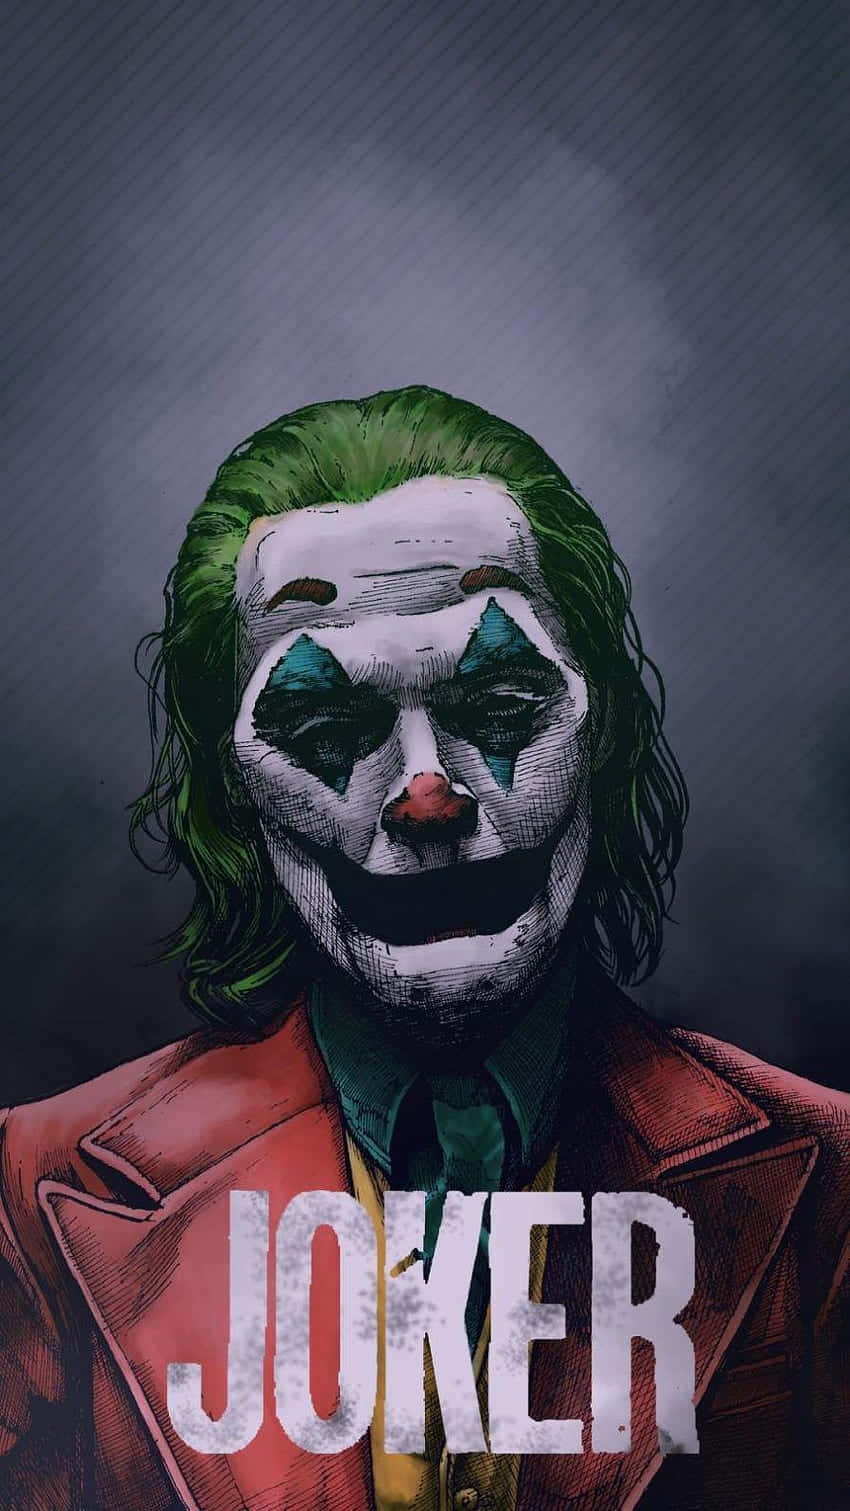 The Joker's iconic smile sparks a feeling of mystery and mischief. Wallpaper